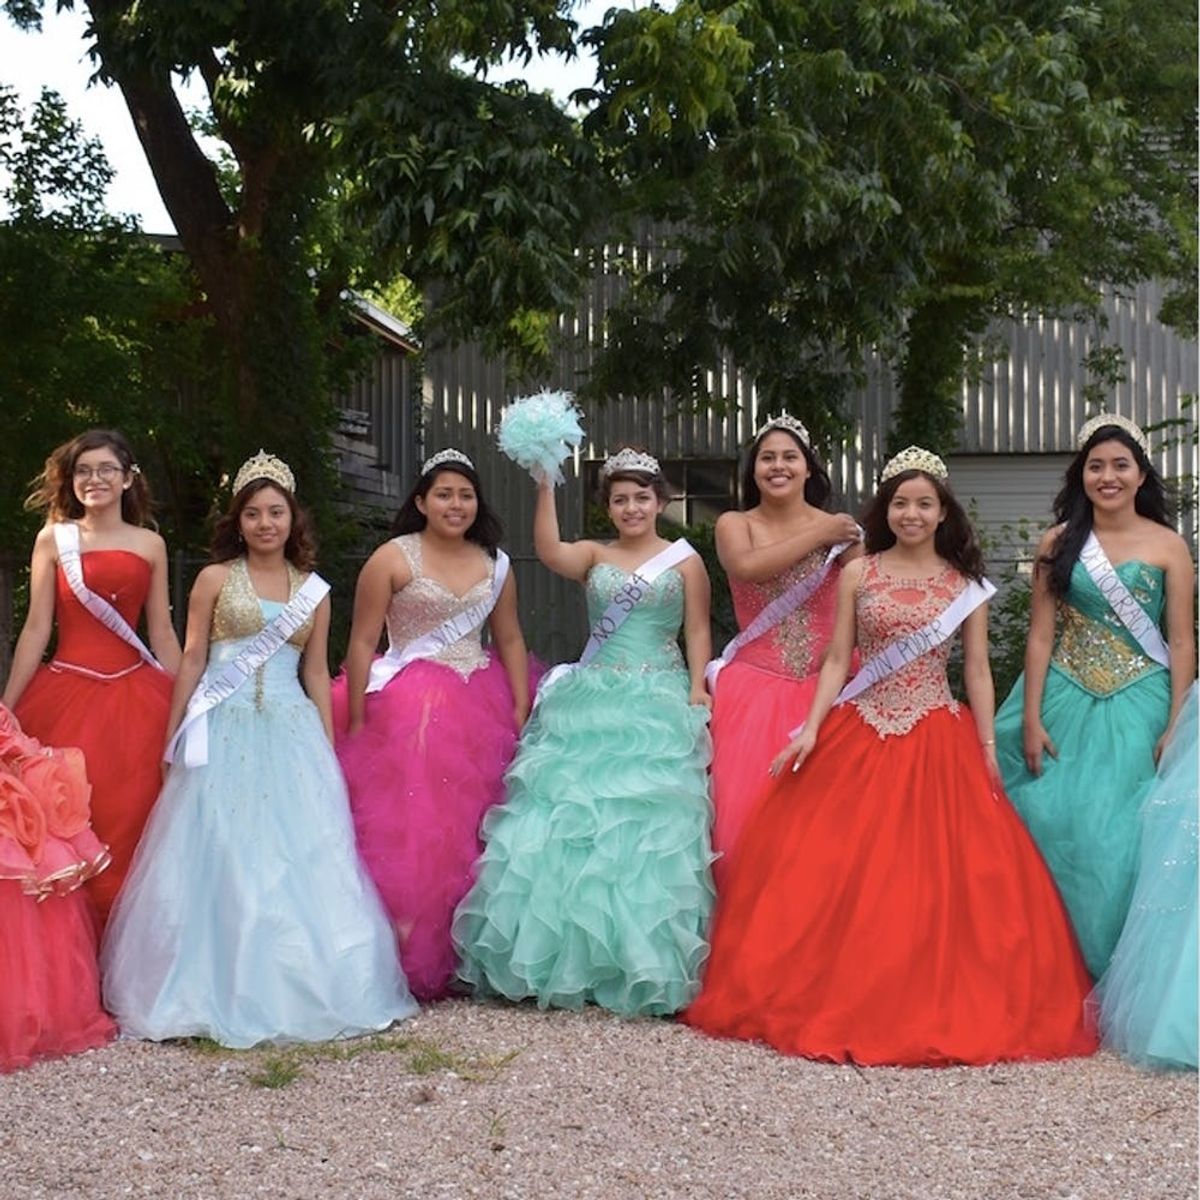 These Texas Teens Are Protesting Their State in Quinceañera Gowns